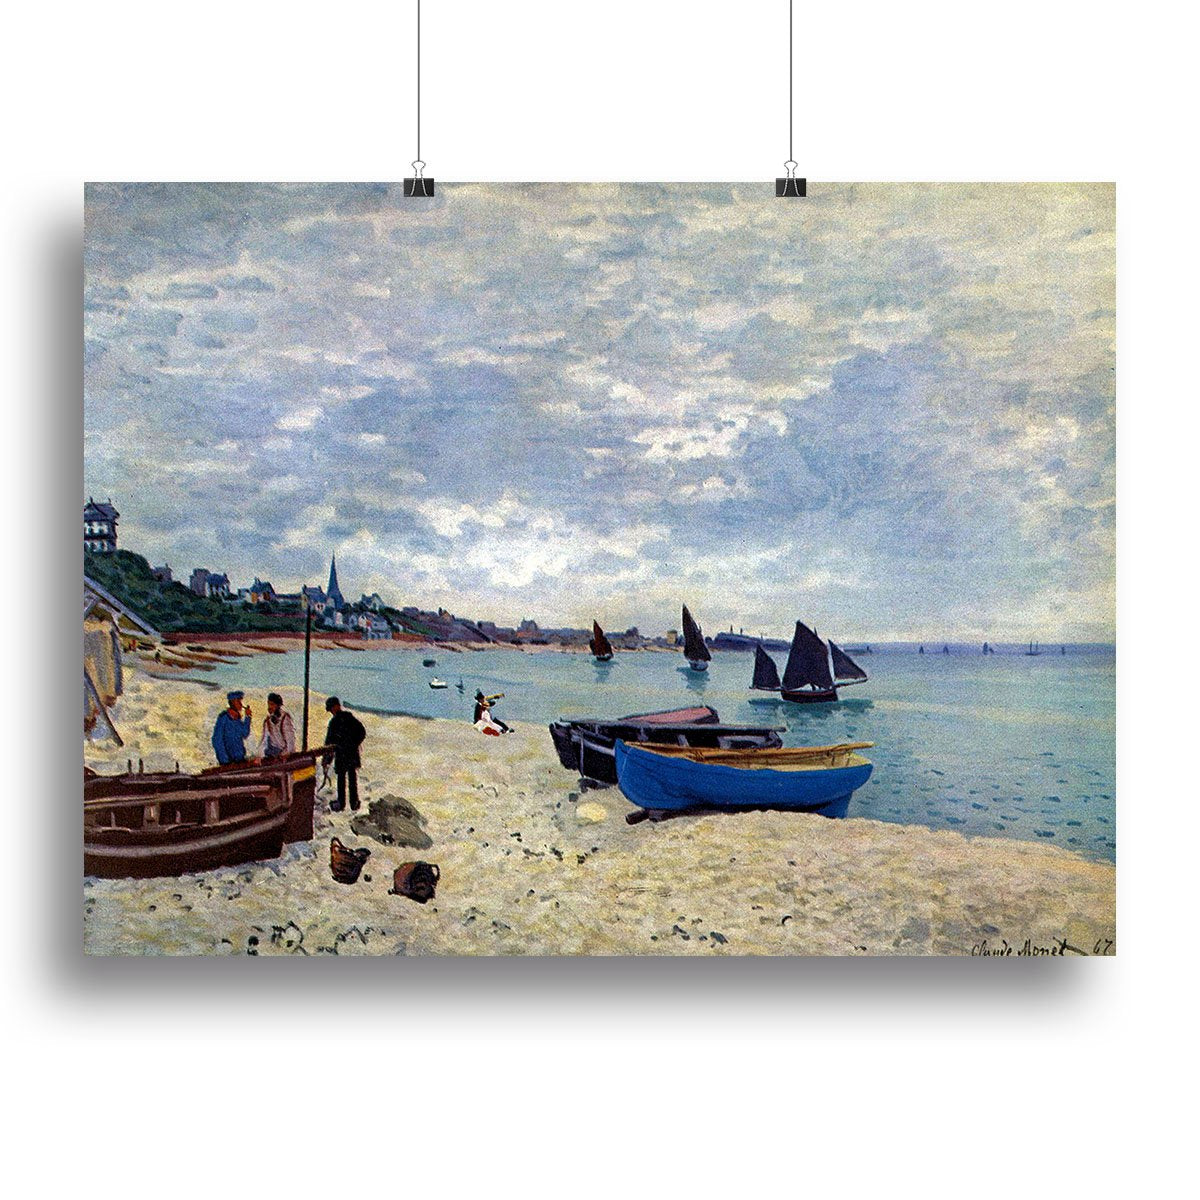 The Beach at Sainte Adresse 2 by Monet Canvas Print or Poster